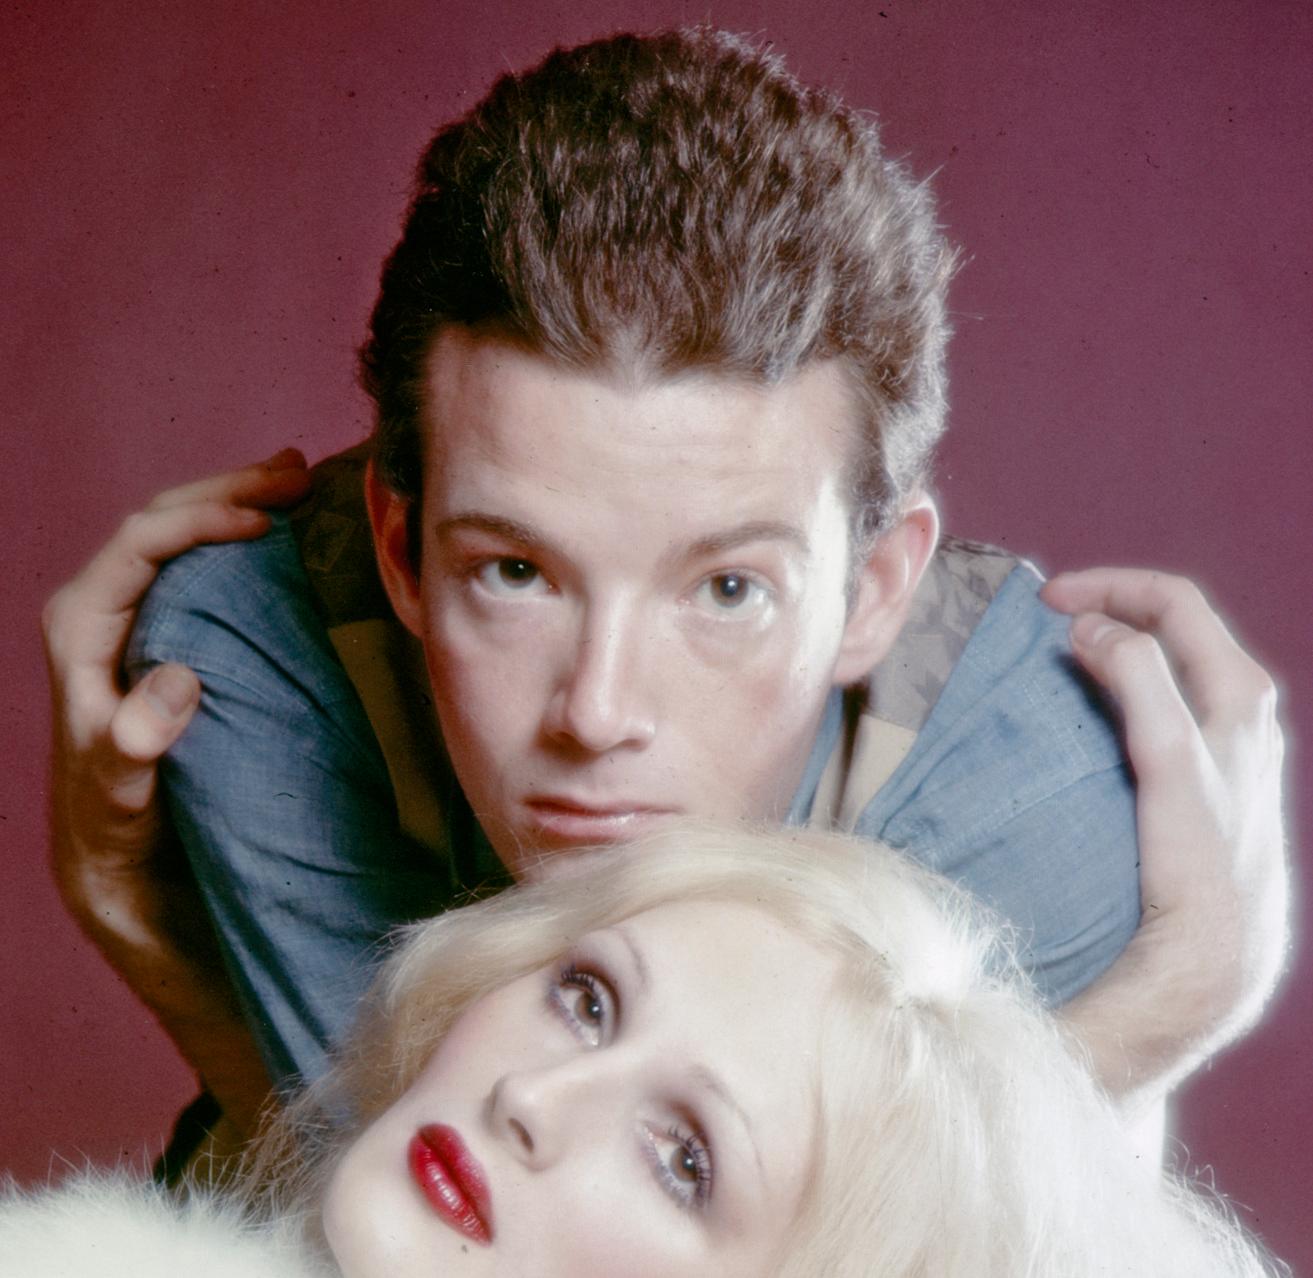 This color photograph was made directly from the original Kodachrome transparency from Jack Mitchell’s 1971 studio session of Jackie Curtis as “Blue Denim” with Candy Darling as “Donna Bella Beads” as they appeared in Curtis’ hit play “Vain Victory: